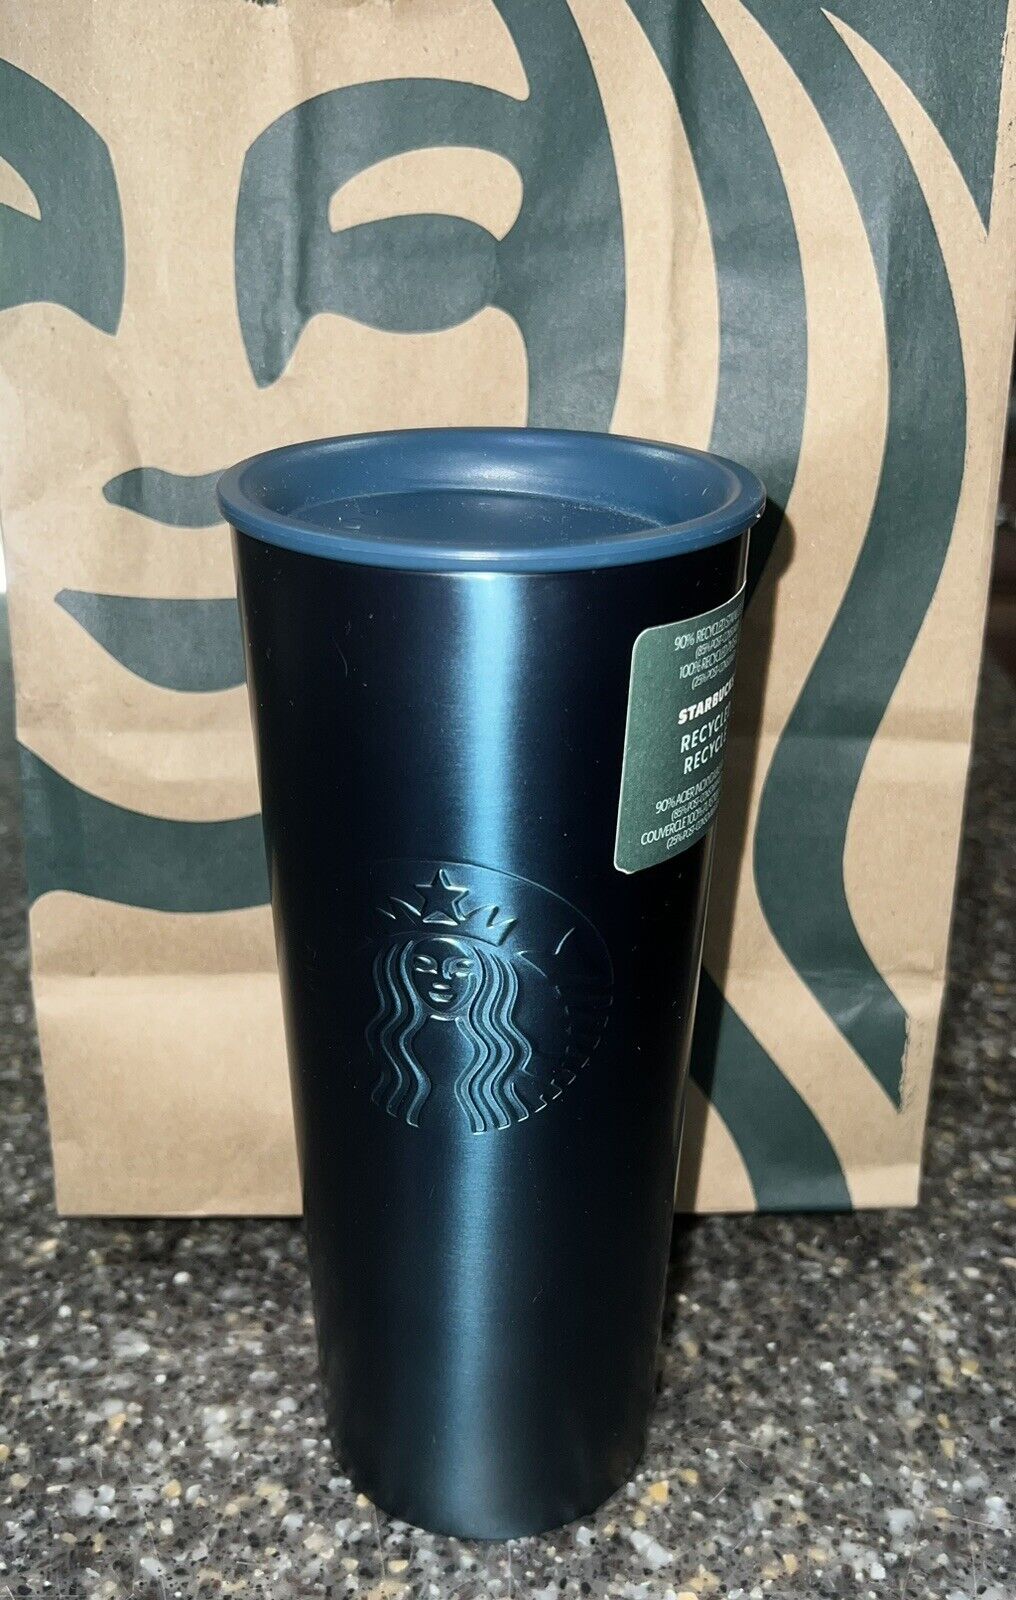 Starbucks BRAND NEW Gorgeous Teal Blue Recycled Stainless Steel Tumbler 16oz